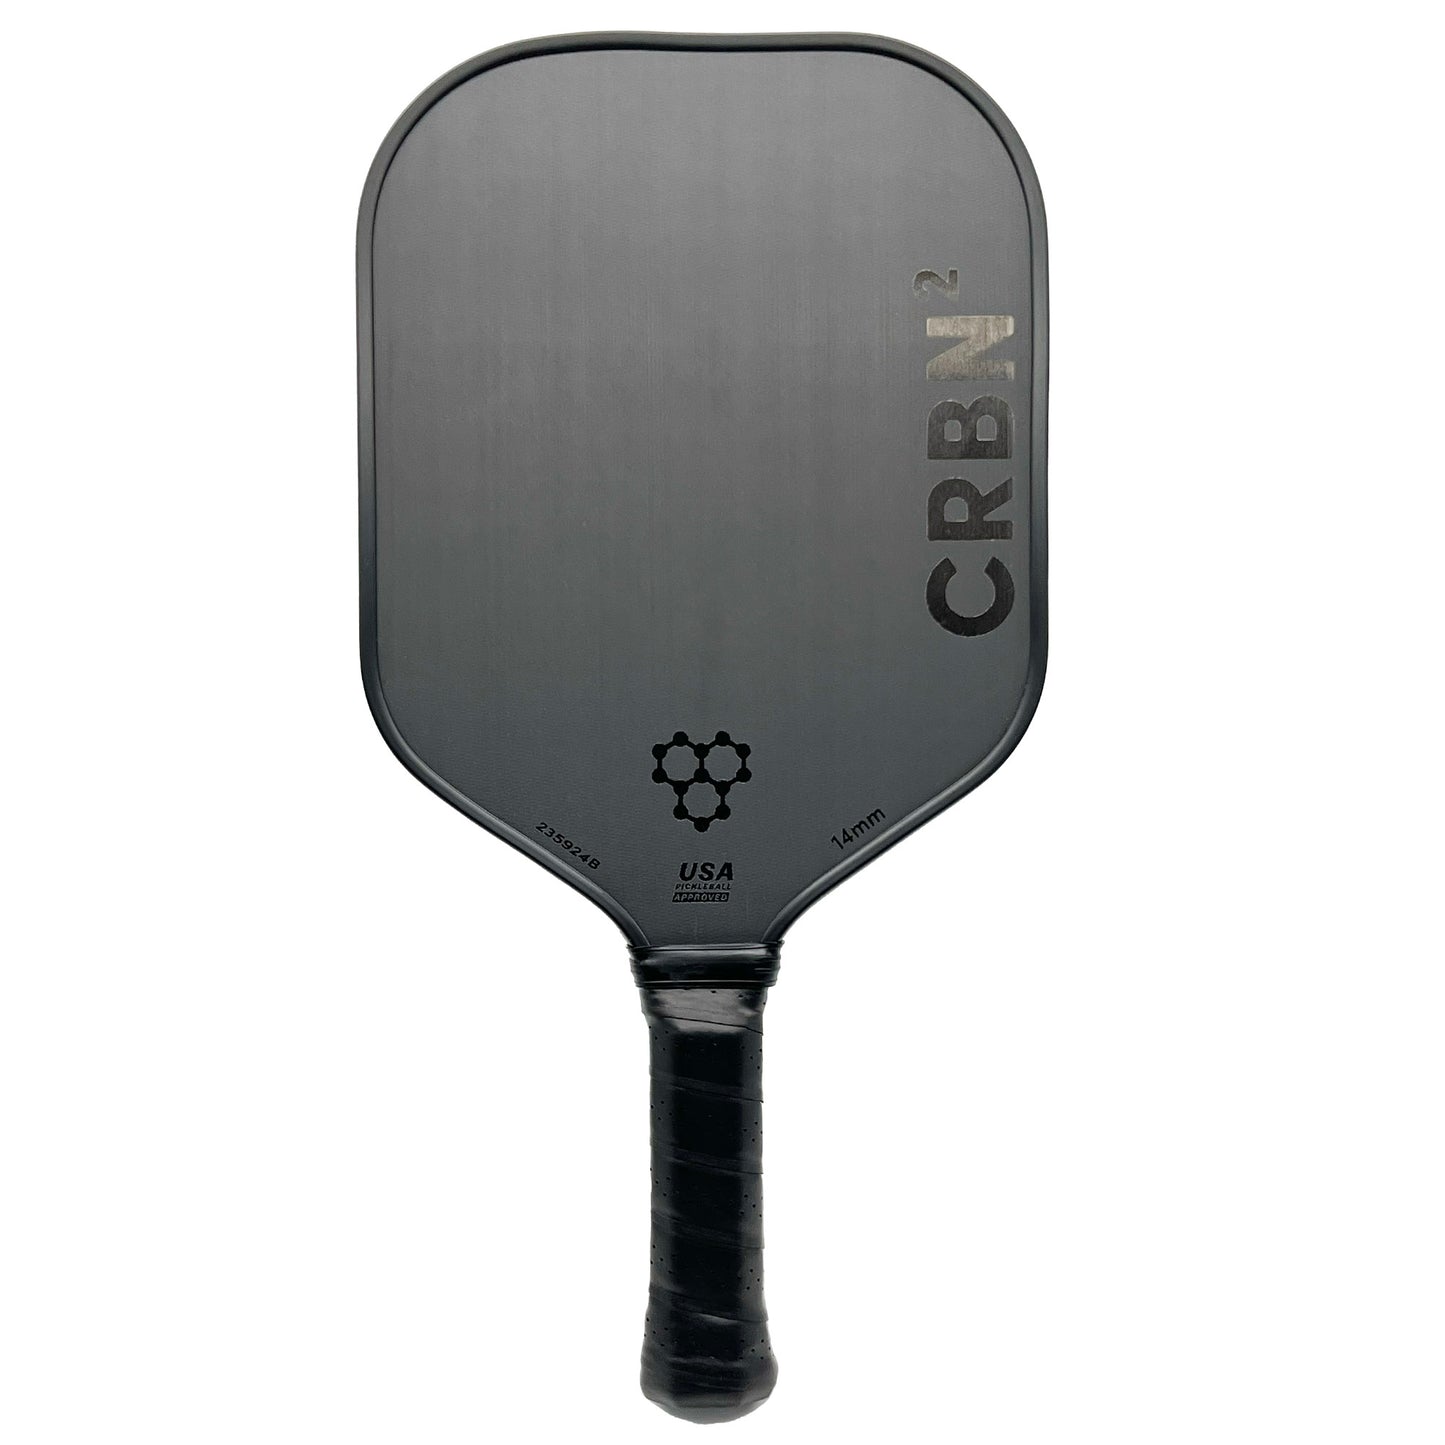 CRBN 2 Control Series Paddle.  One of the best paddles on the market and delivers superior performance for all players.